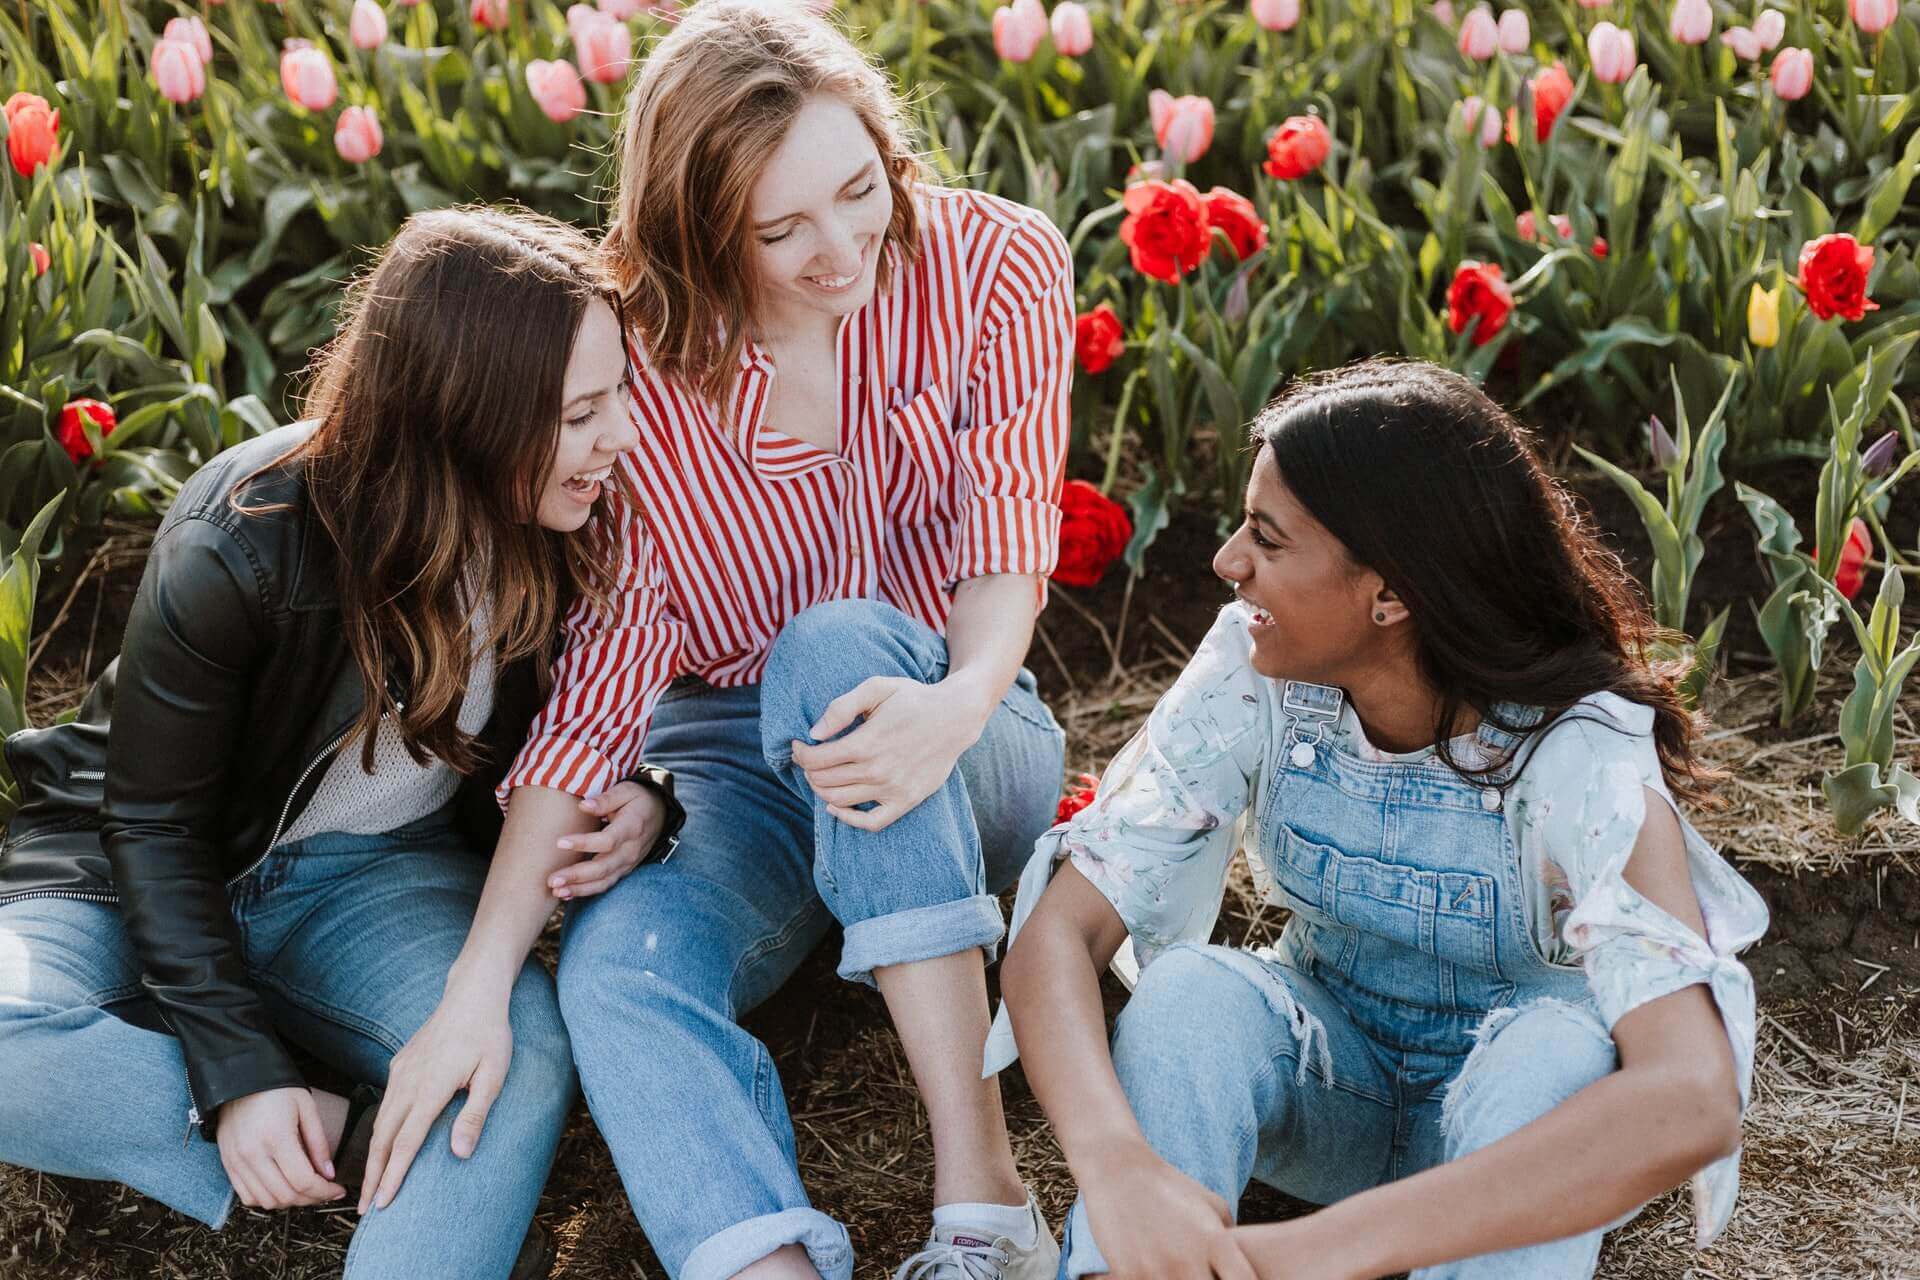 Three young women sitting on the ground talking and smilking, with a field of tulips behind them.